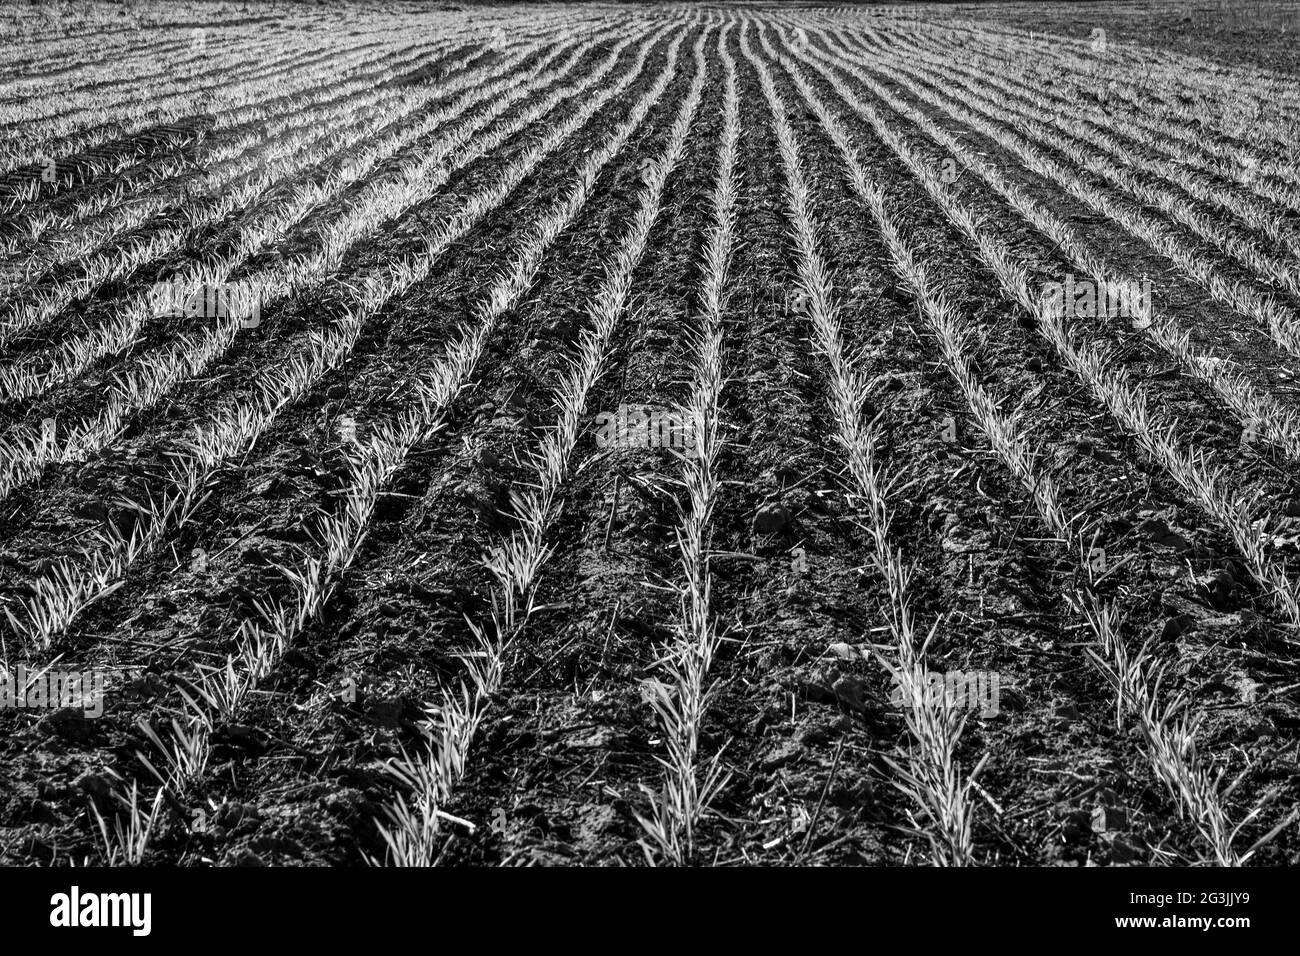 Furrows in the sown field, Buenos Aires province, Argentina. Stock Photo